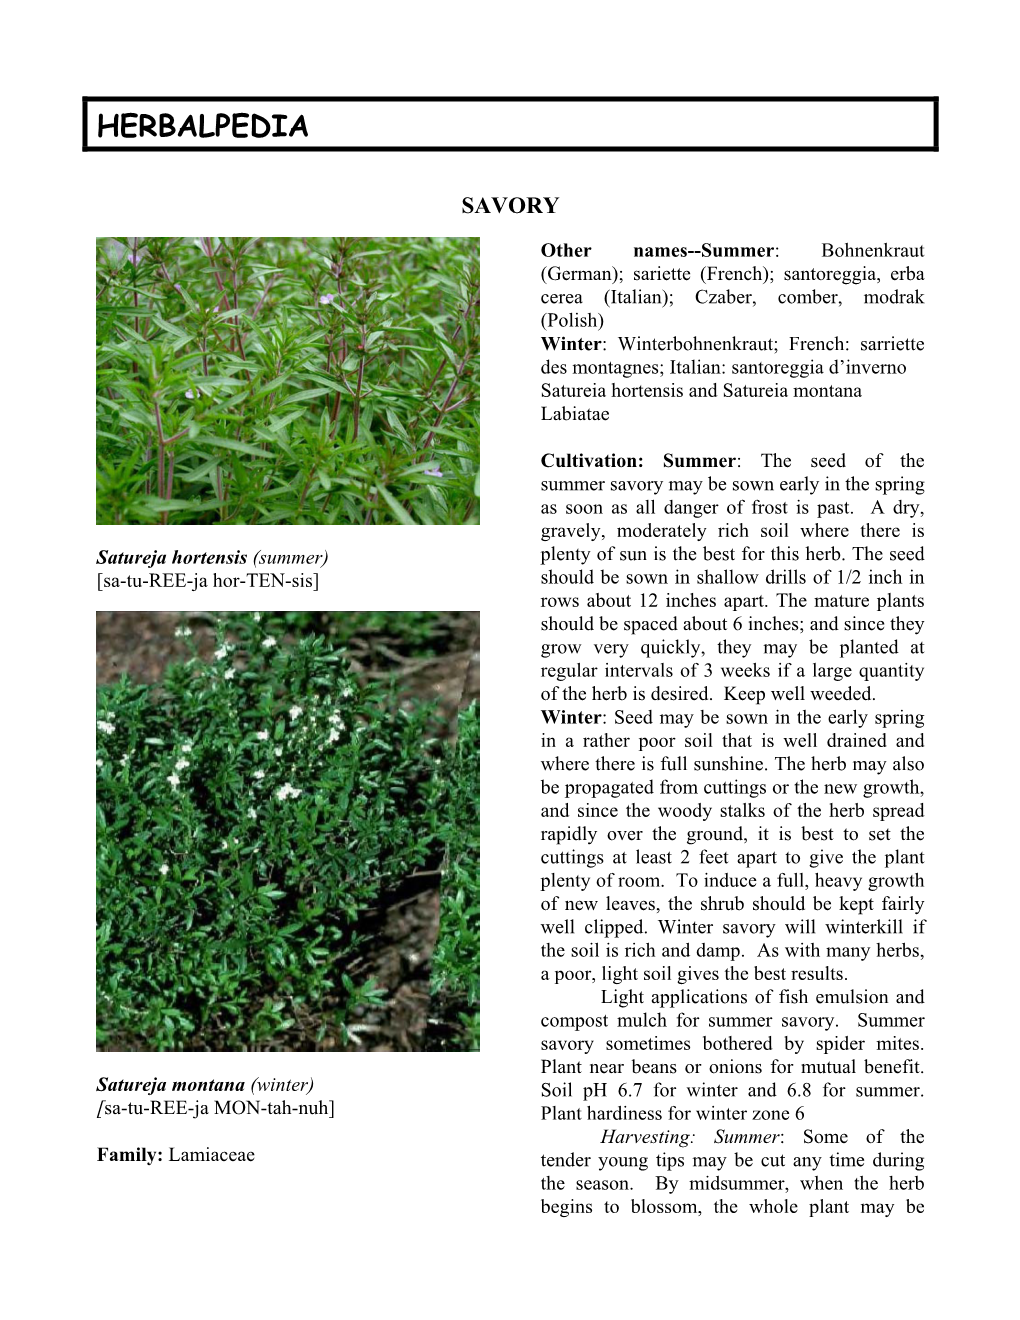 Summer Savory May Be Sown Early in the Spring As Soon As All Danger of Frost Is Past